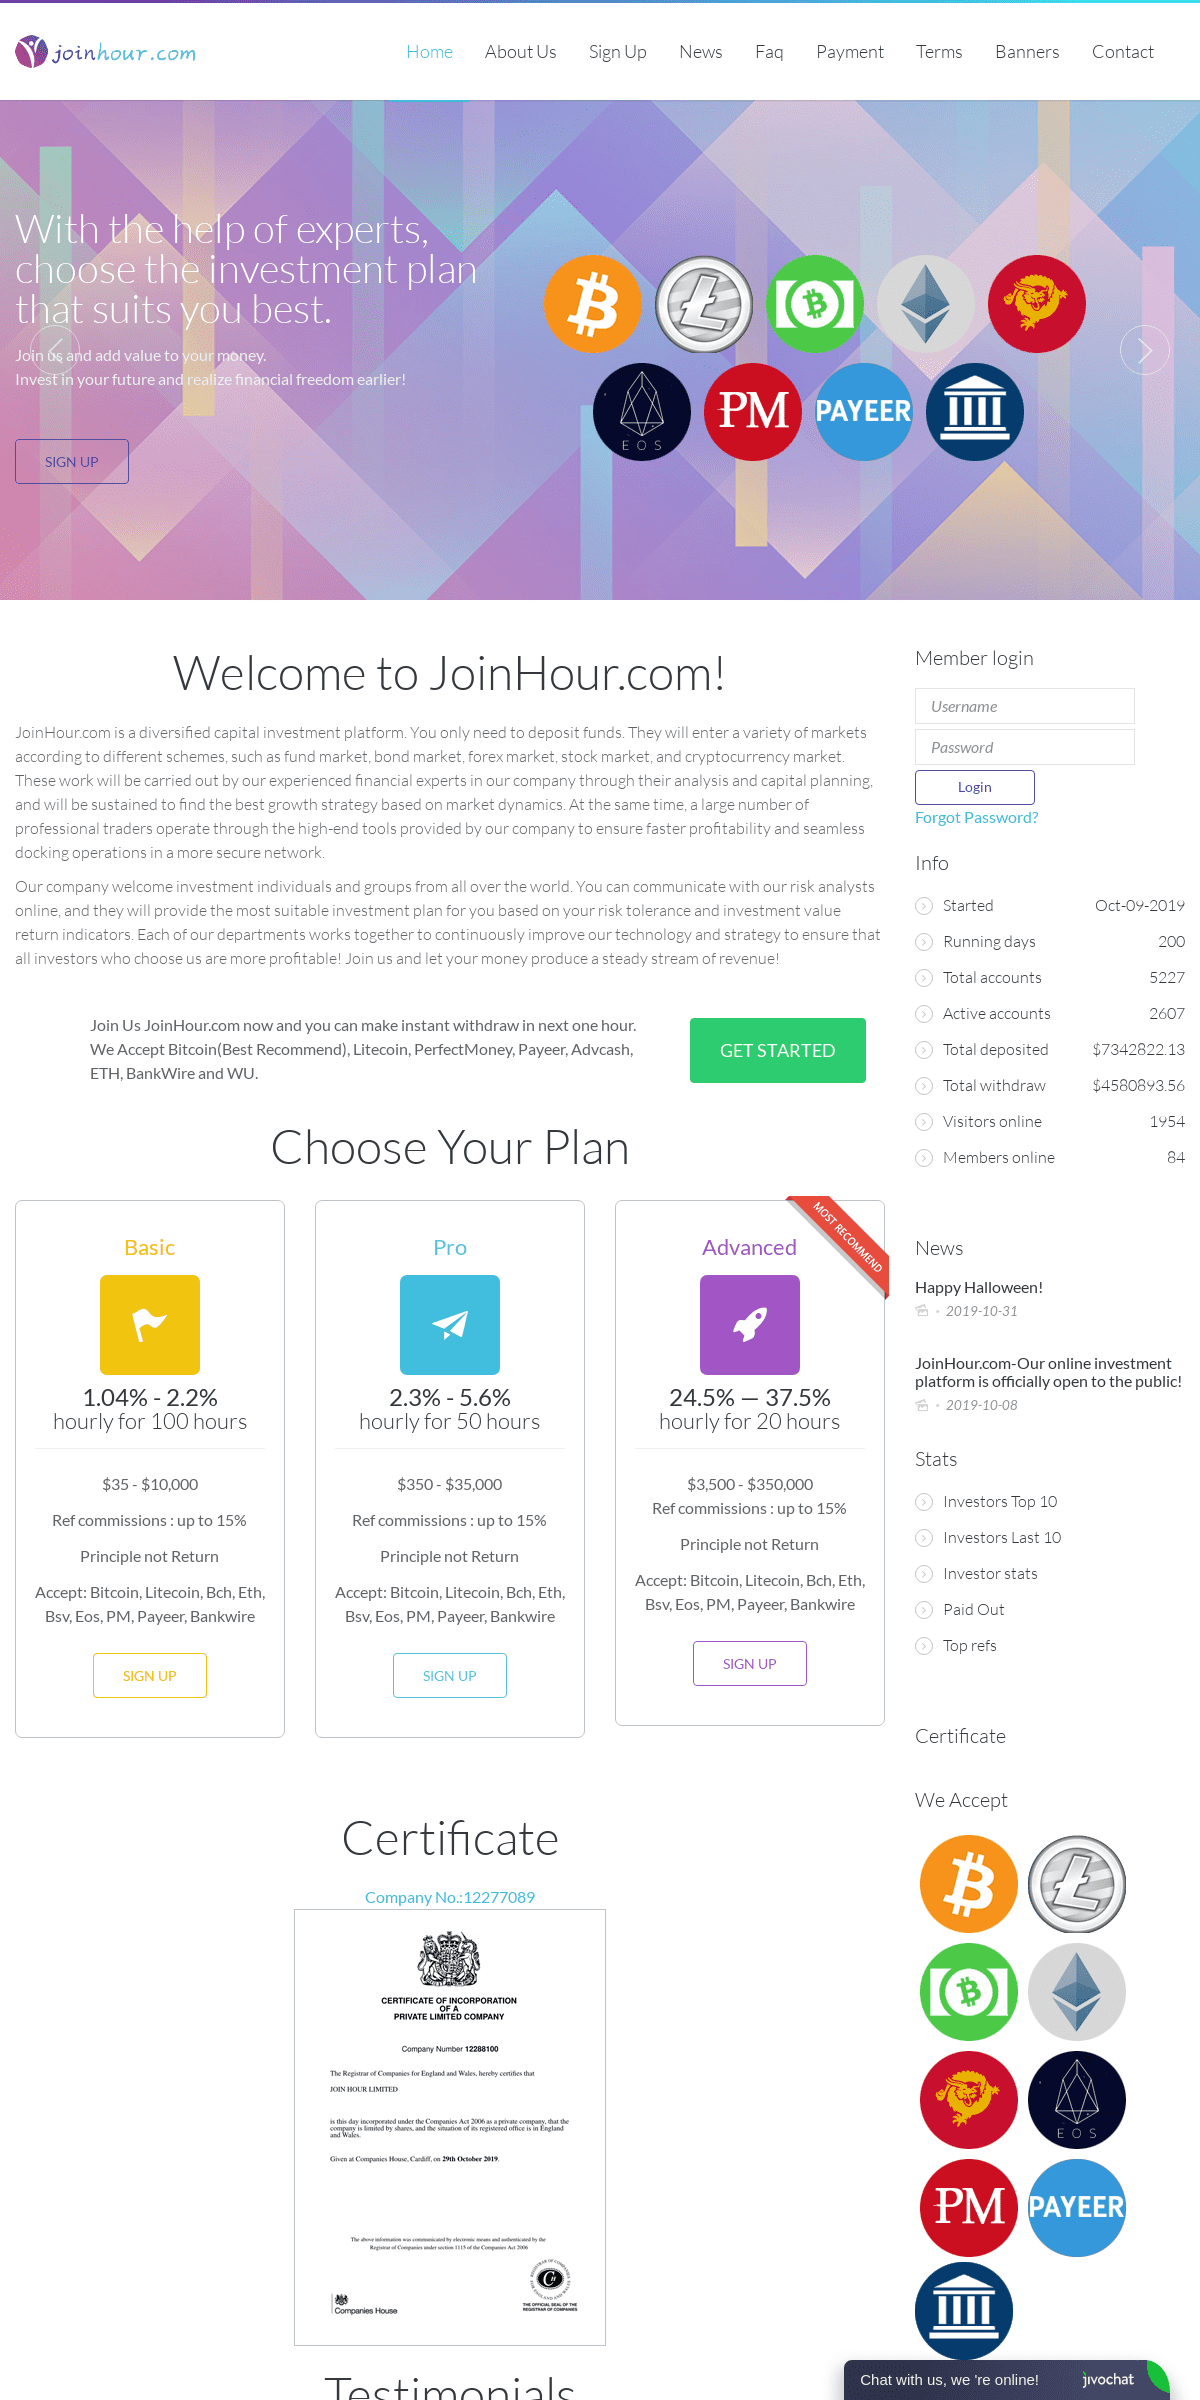 A complete backup of joinhour.com